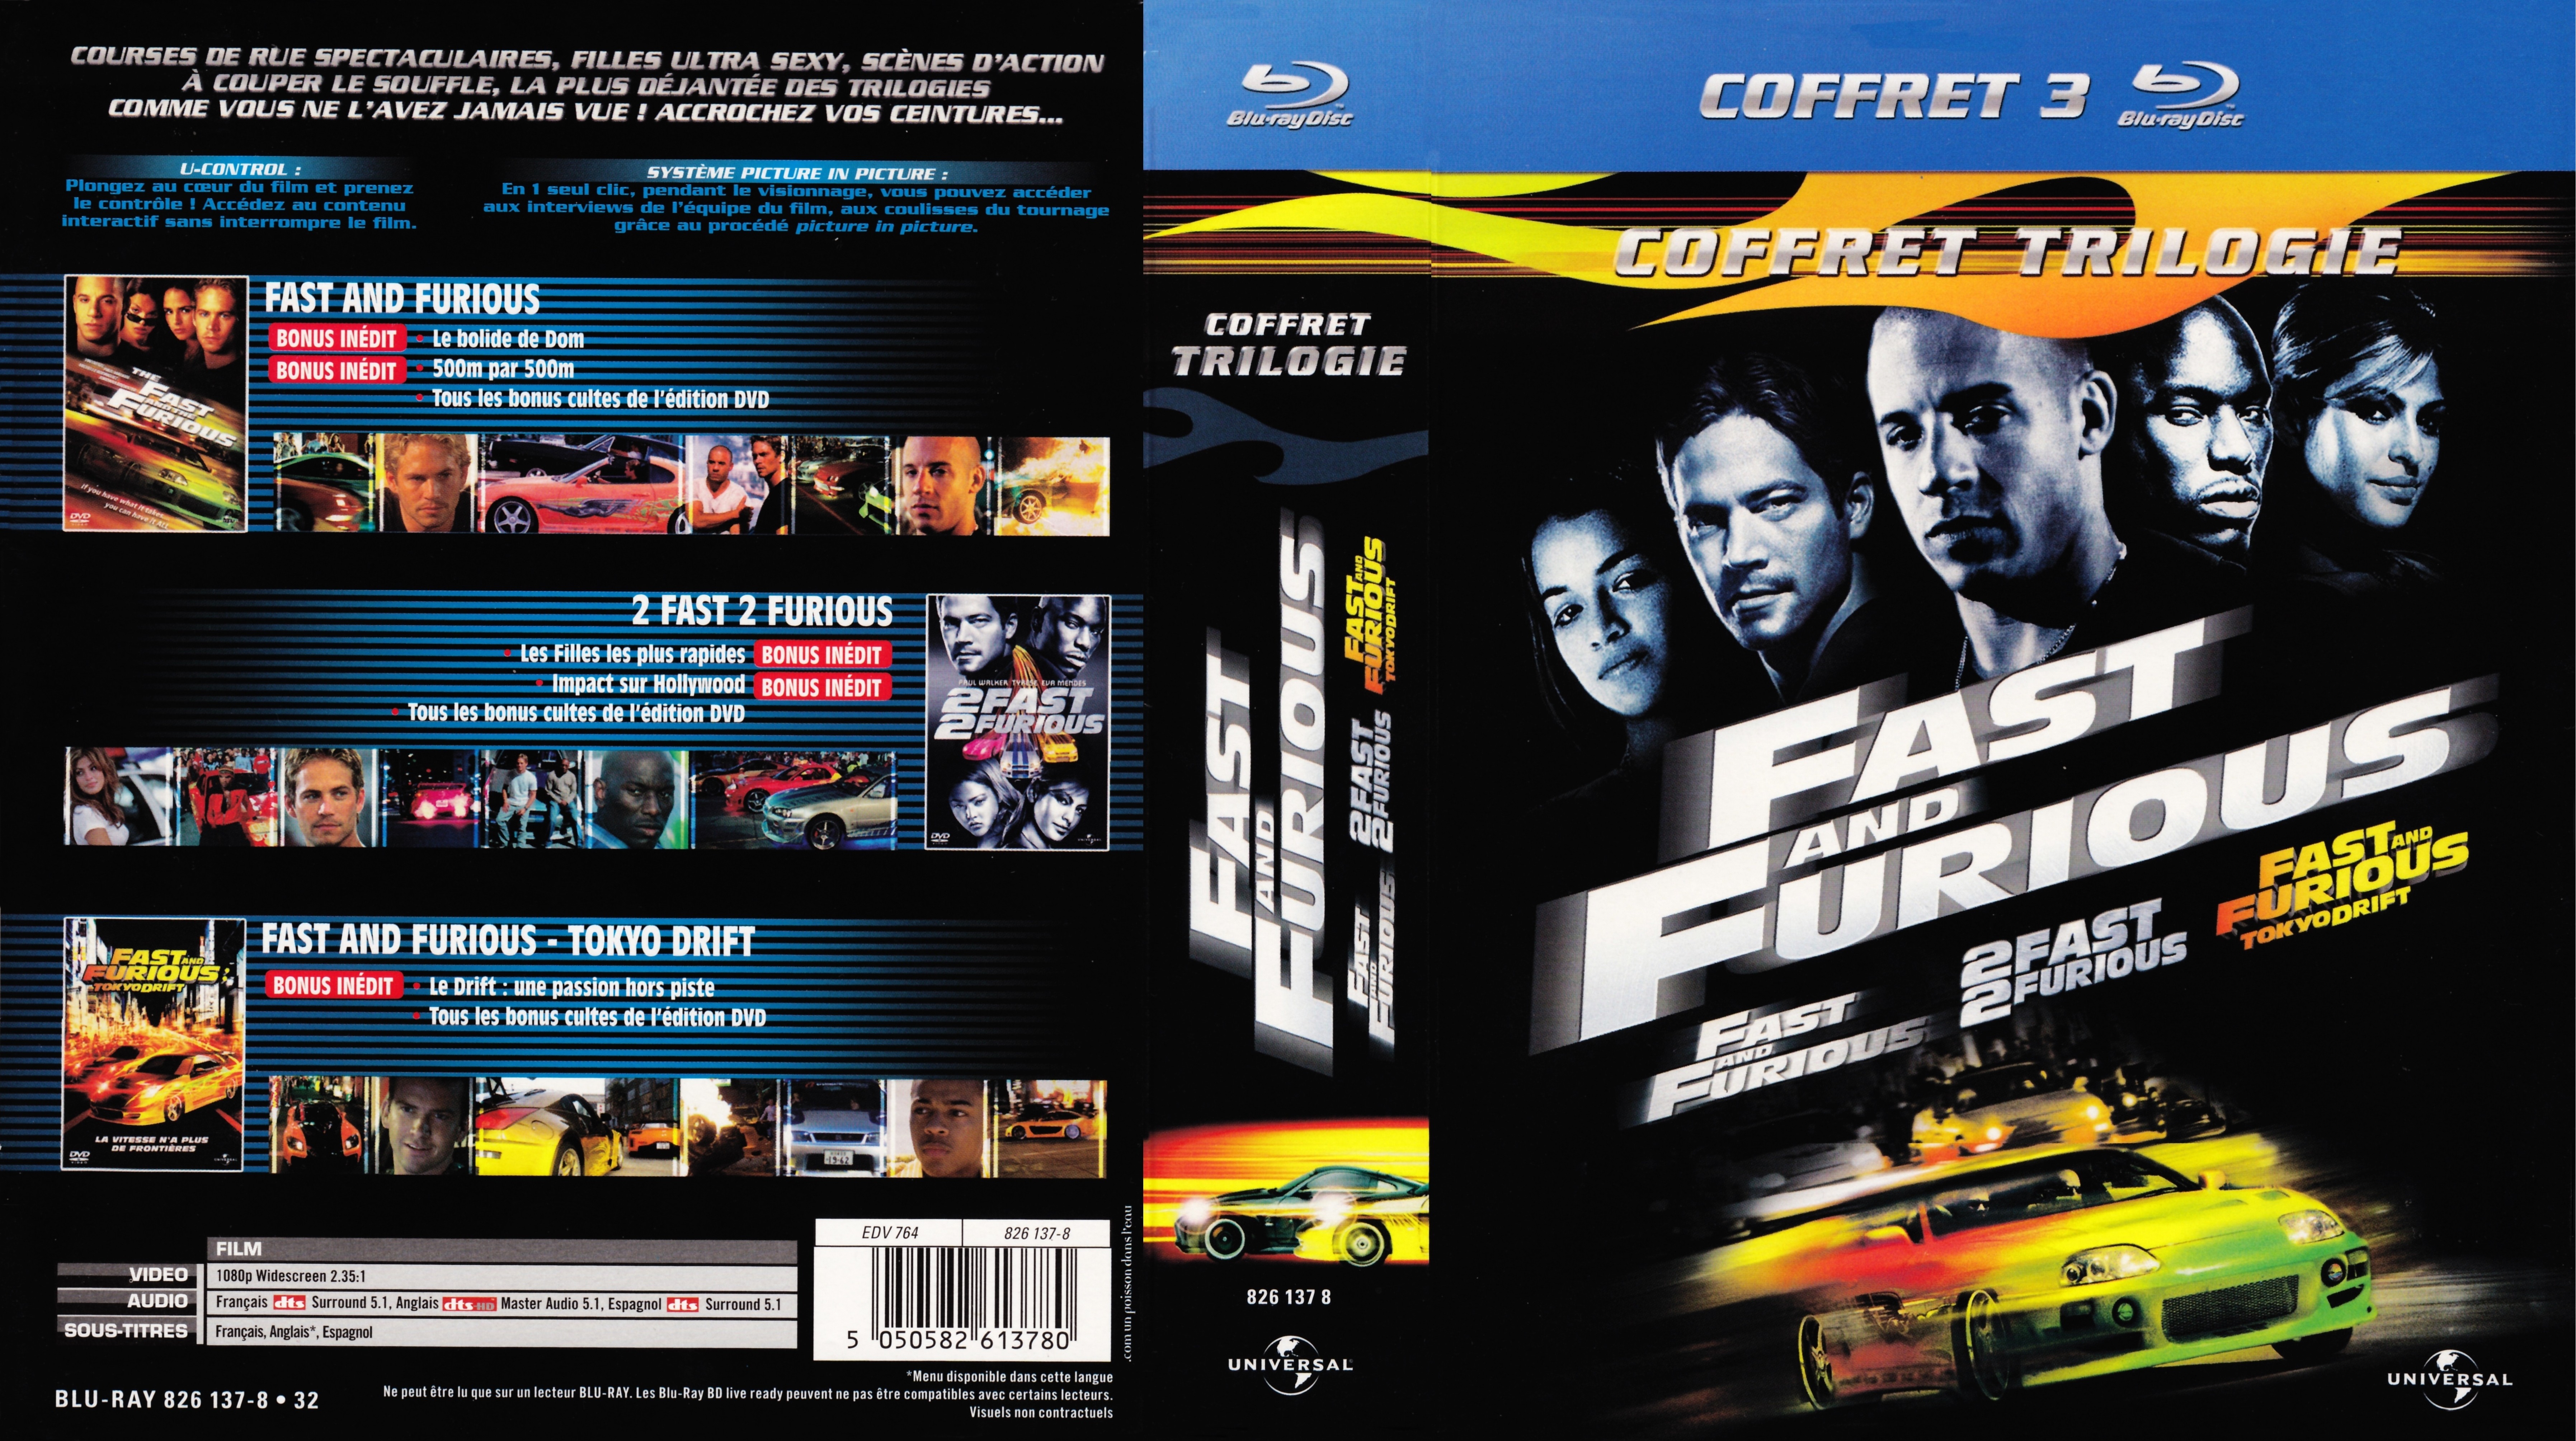 Jaquette DVD Fast and furious Trilogie COFFRET (BLU-RAY)